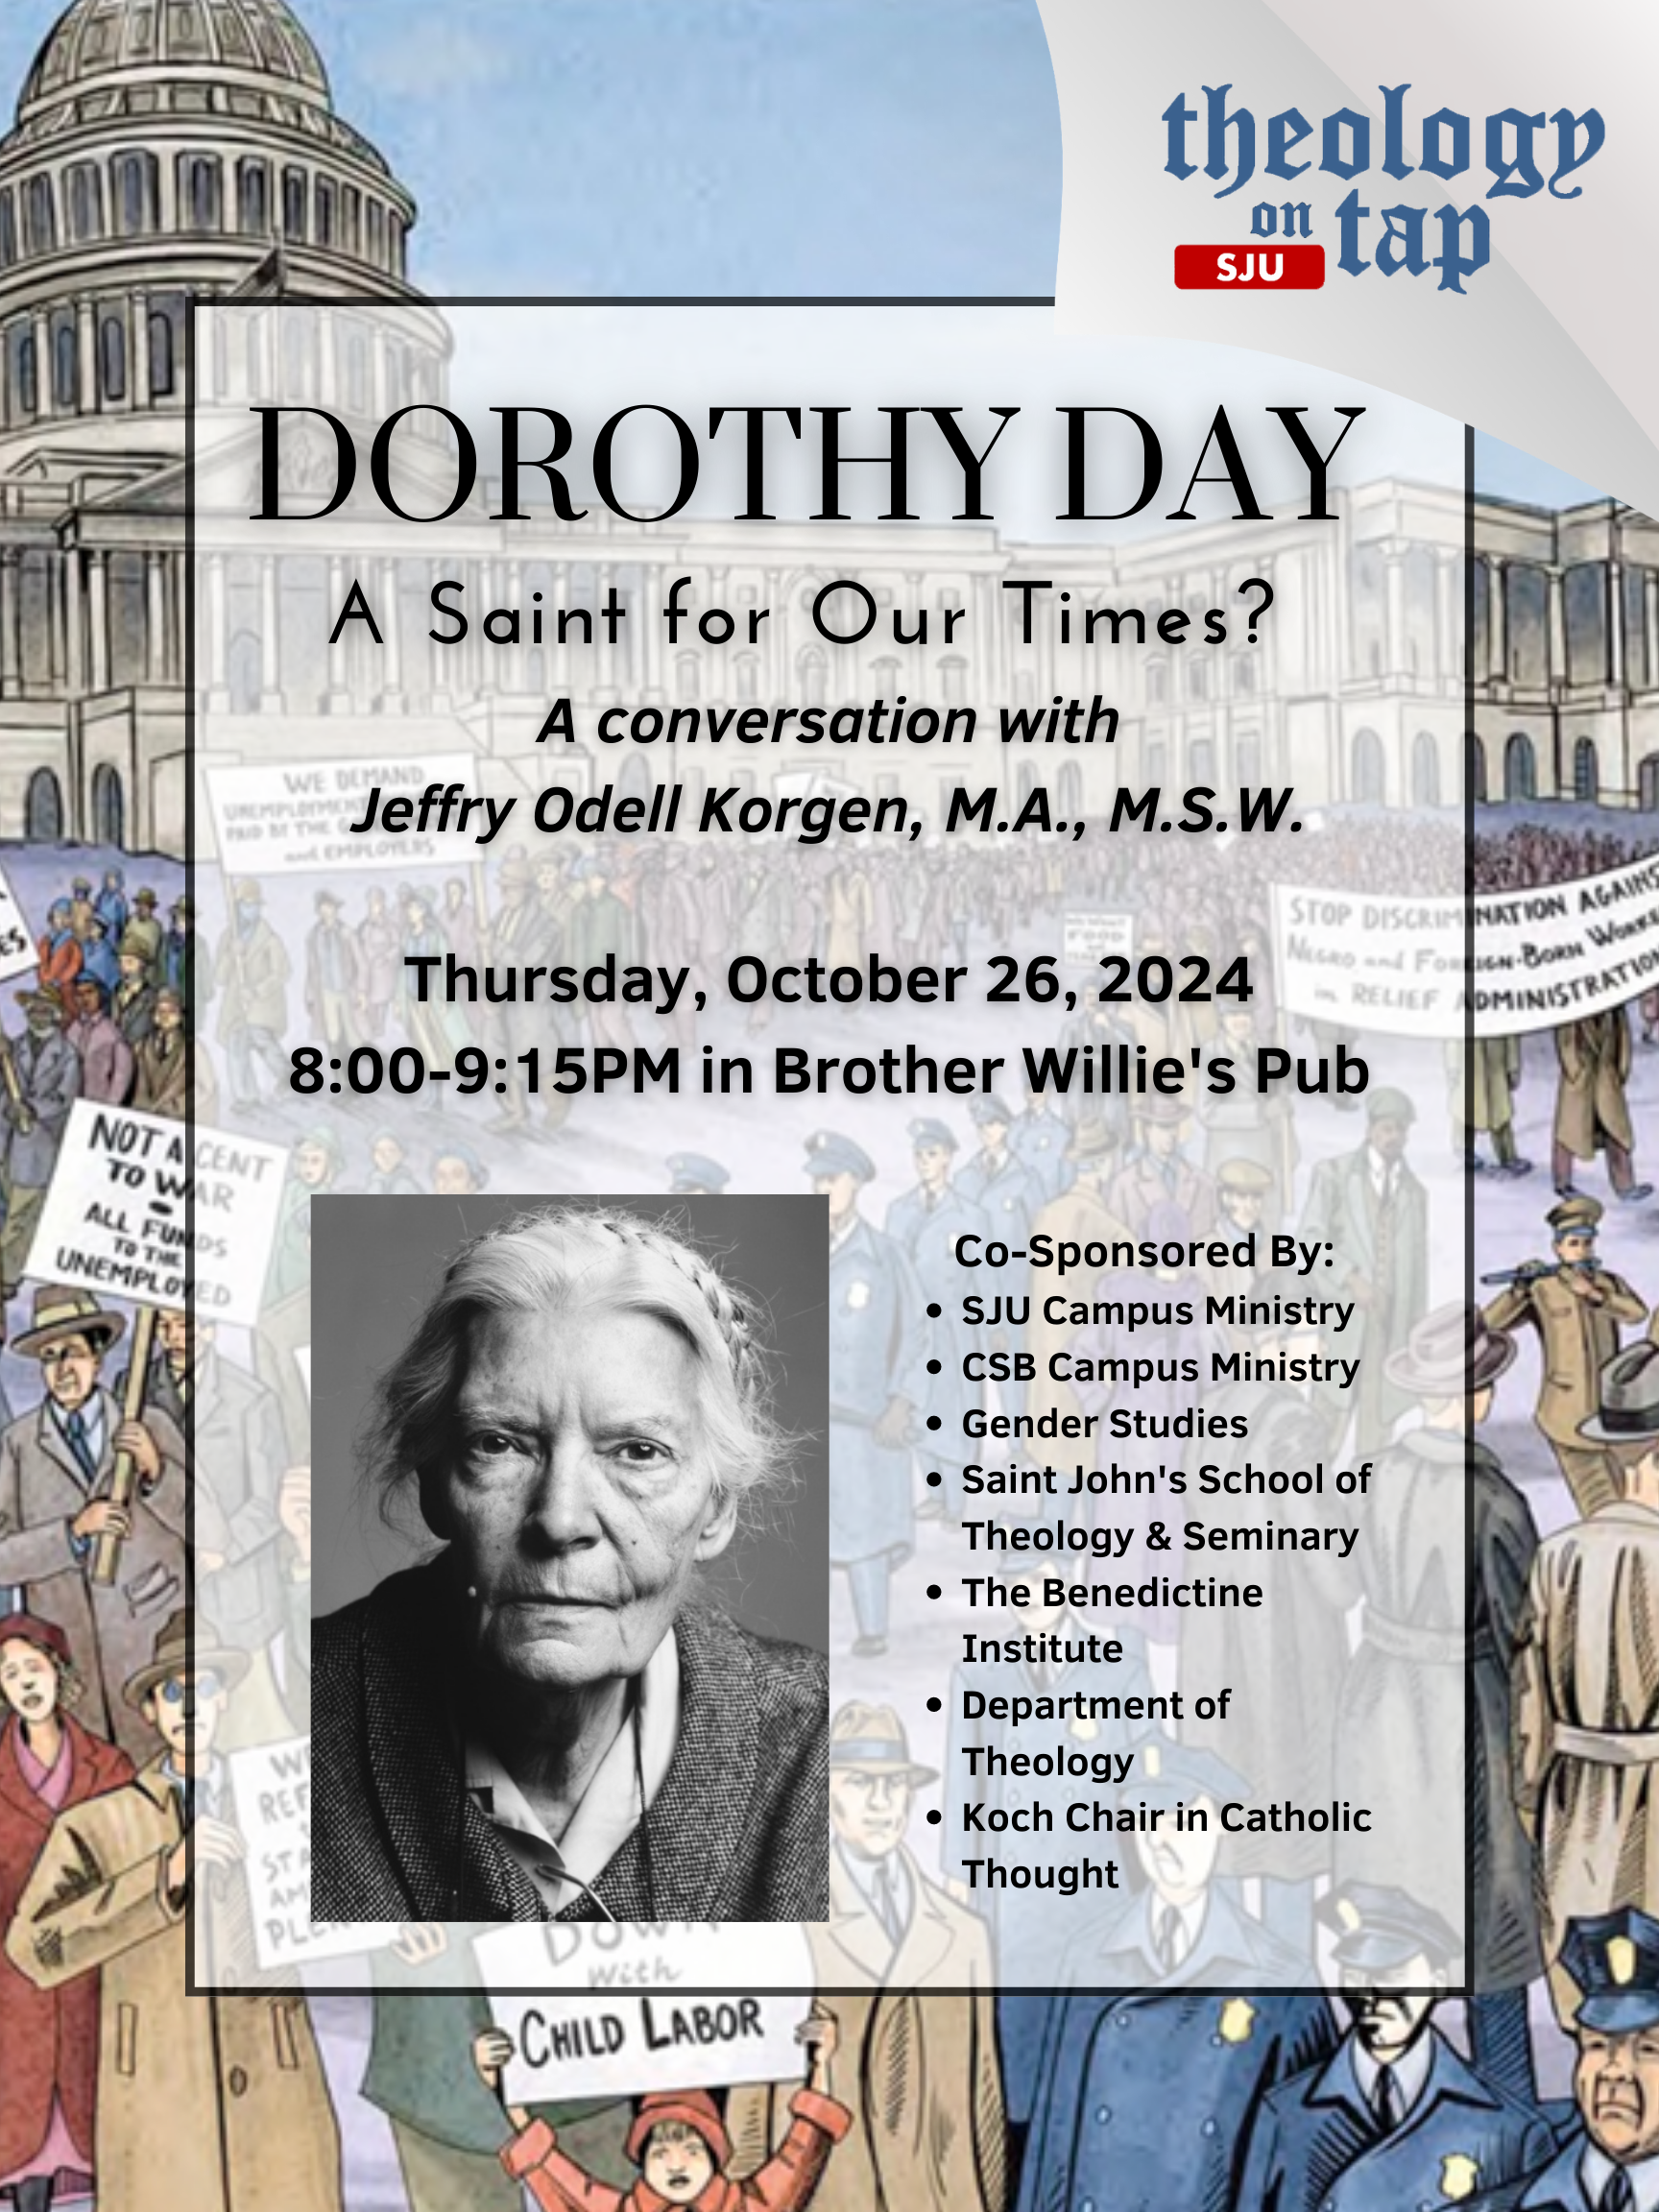 Image of a poster promoting a Dorothy Day event at Theology on Tap at SJU as part of SJU Faith